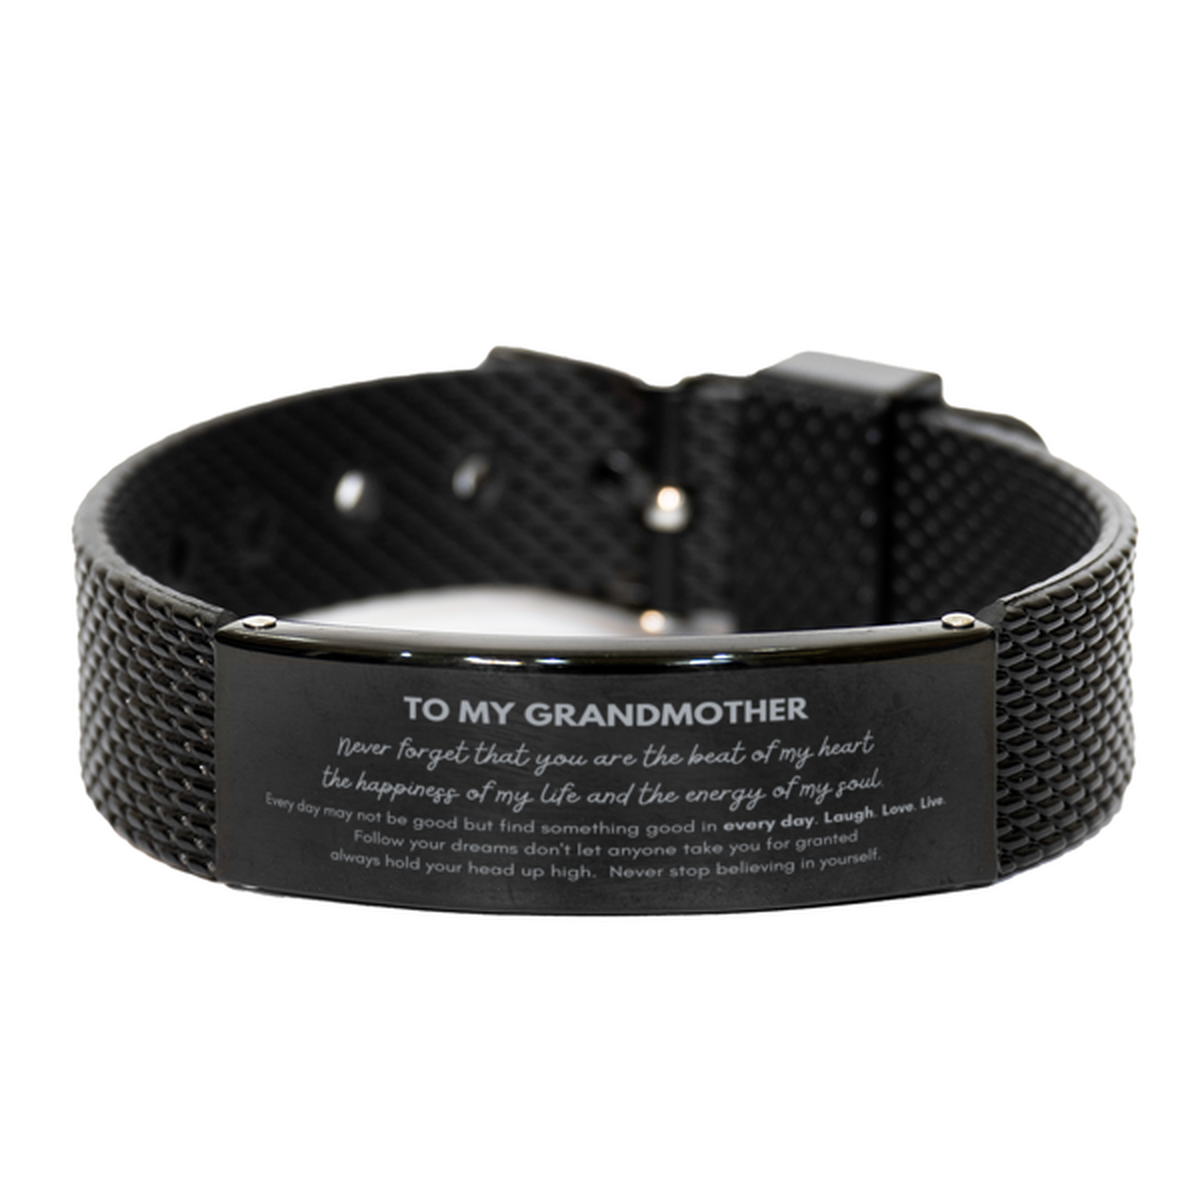 To My Grandmother Bracelet Gifts, Christmas Grandmother Black Shark Mesh Bracelet Present, Birthday Unique Motivational For Grandmother, To My Grandmother Never forget that you are the beat of my heart the happiness of my life and the energy of my soul